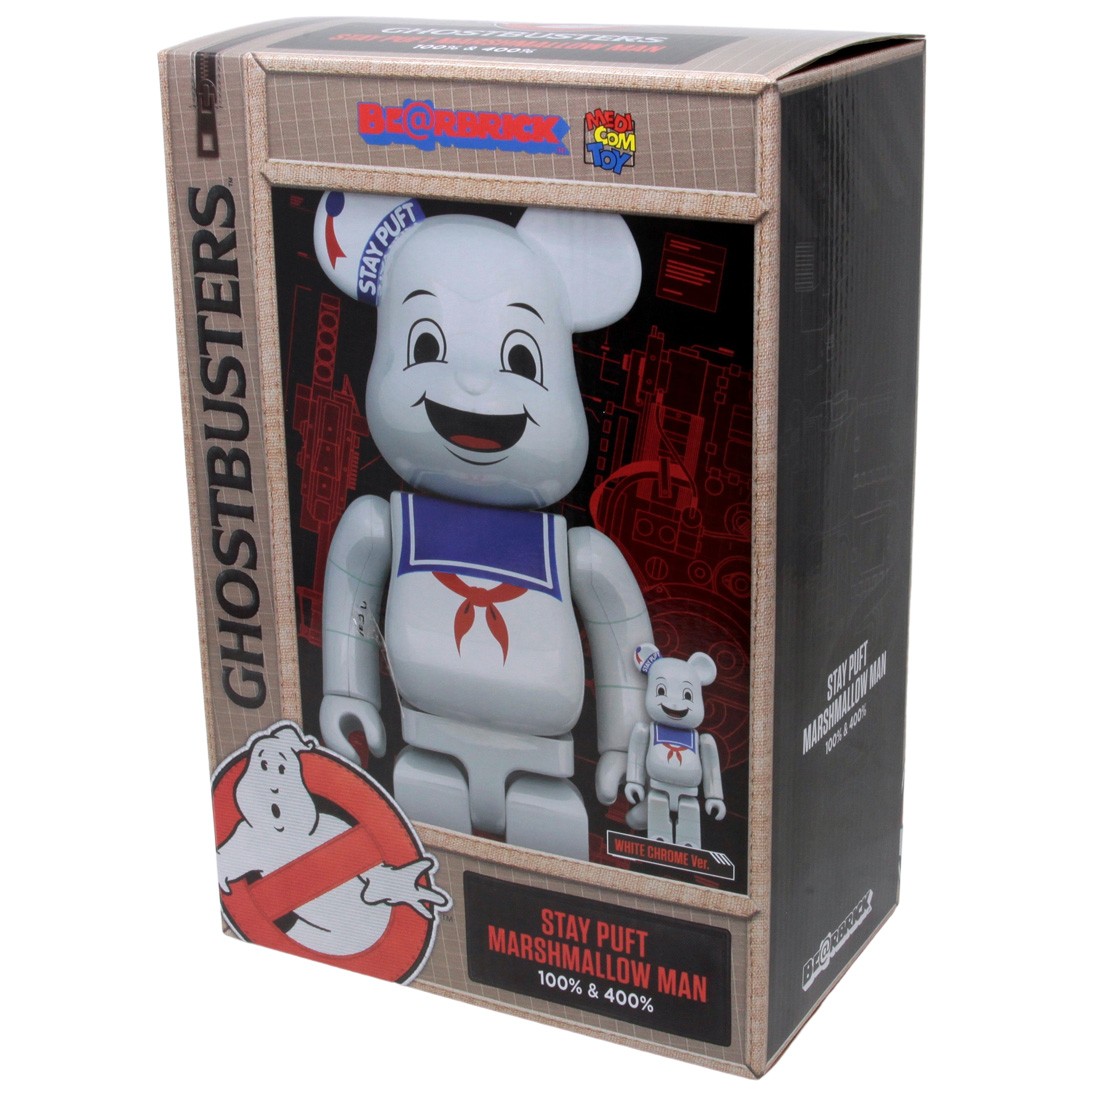 Medicom Ghostbusters Stay Puft Marshmallow Man White Chrome Ver 